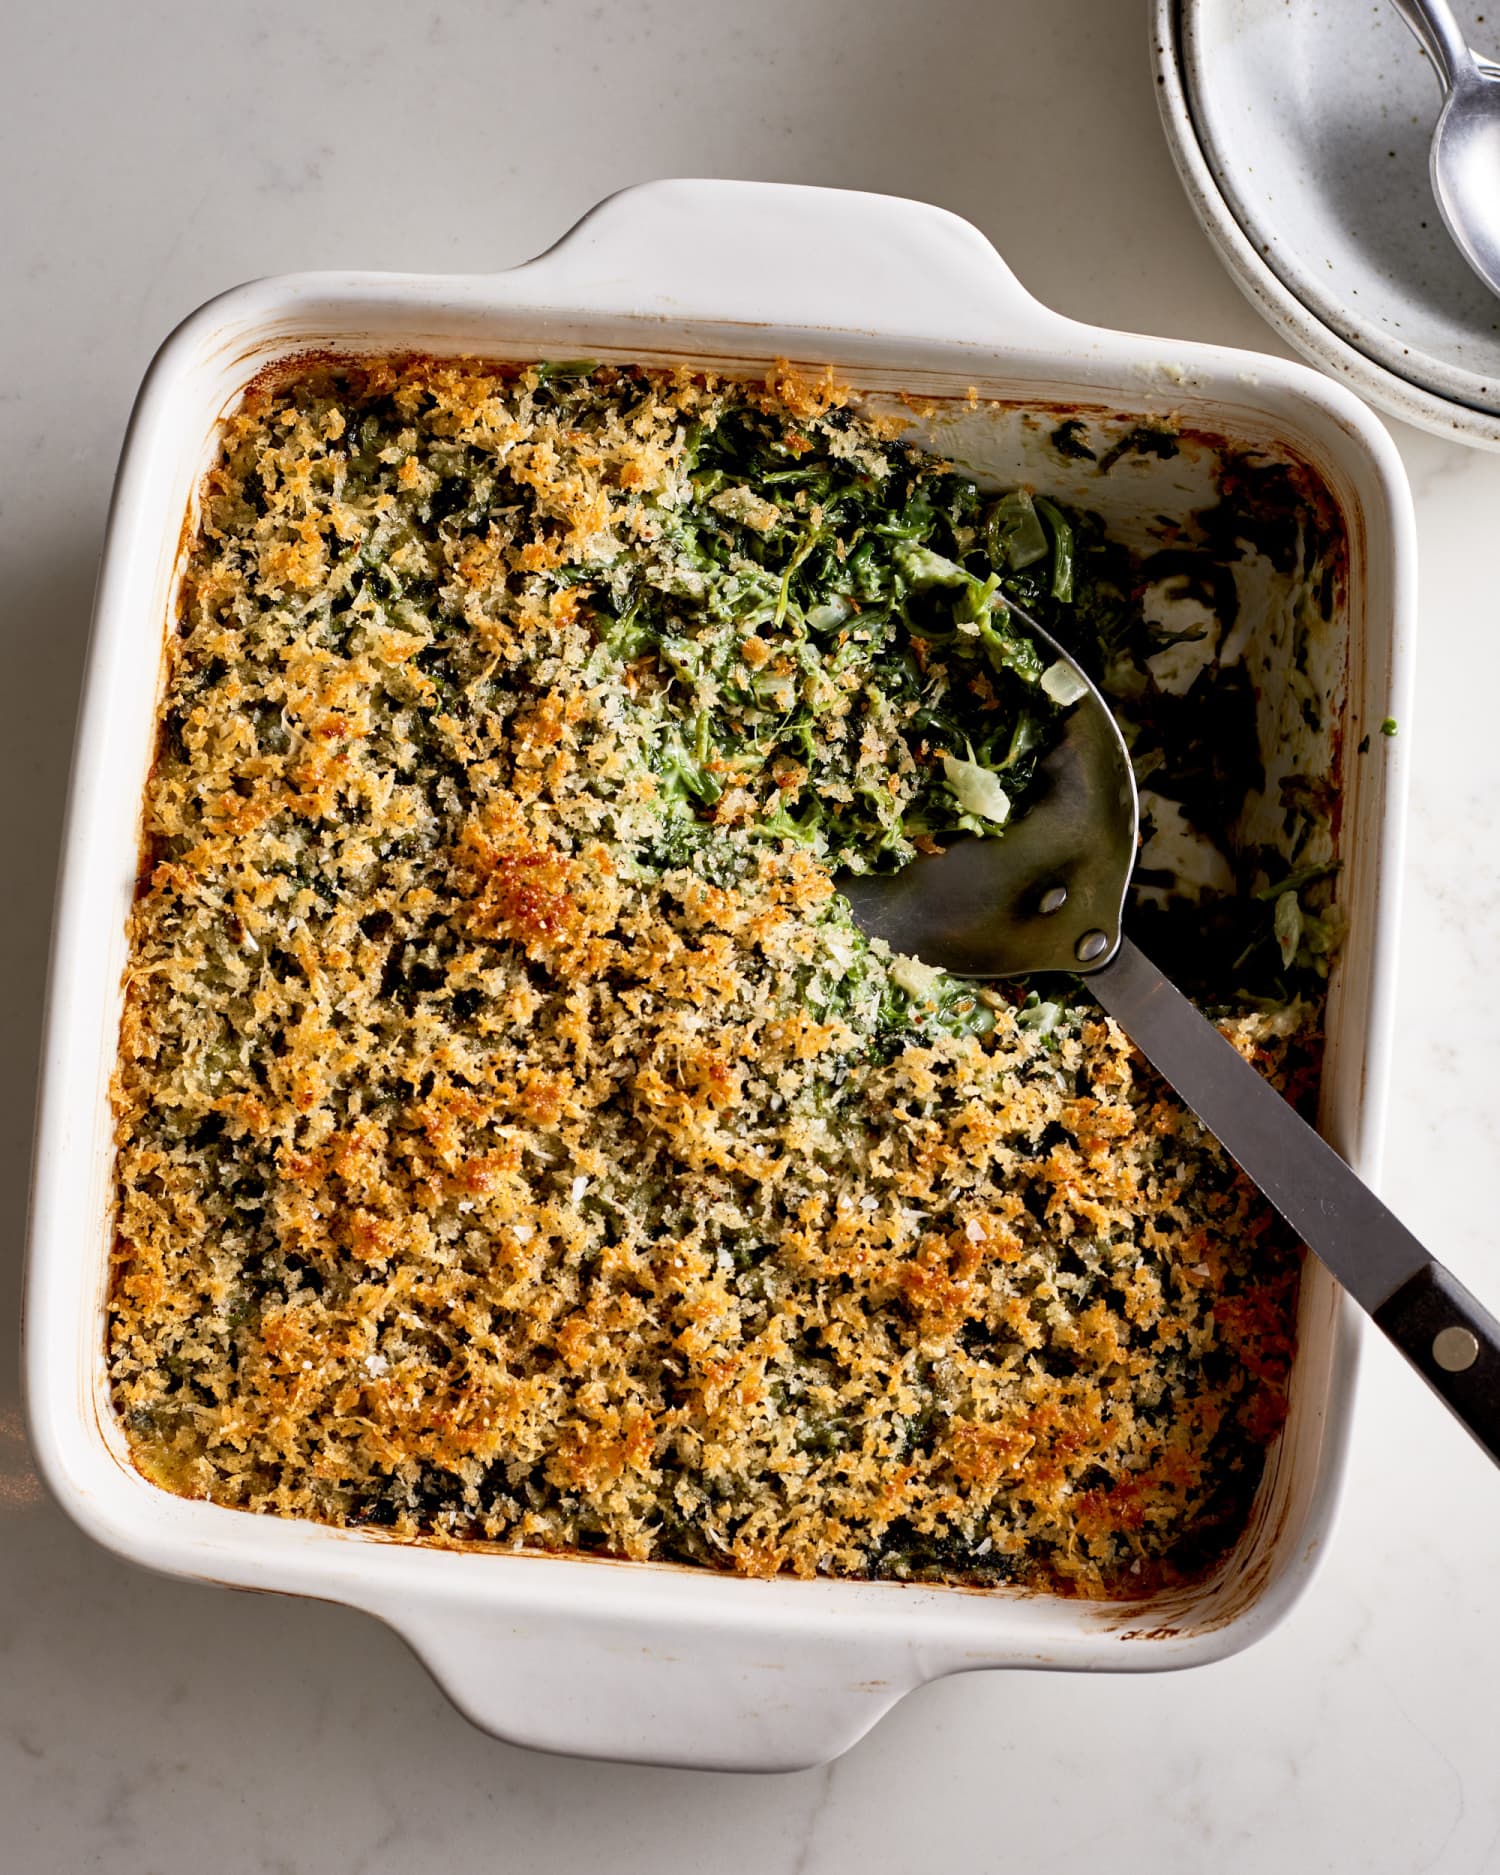 The Easy Spinach Gratin Your Guests Will Fall in Love With